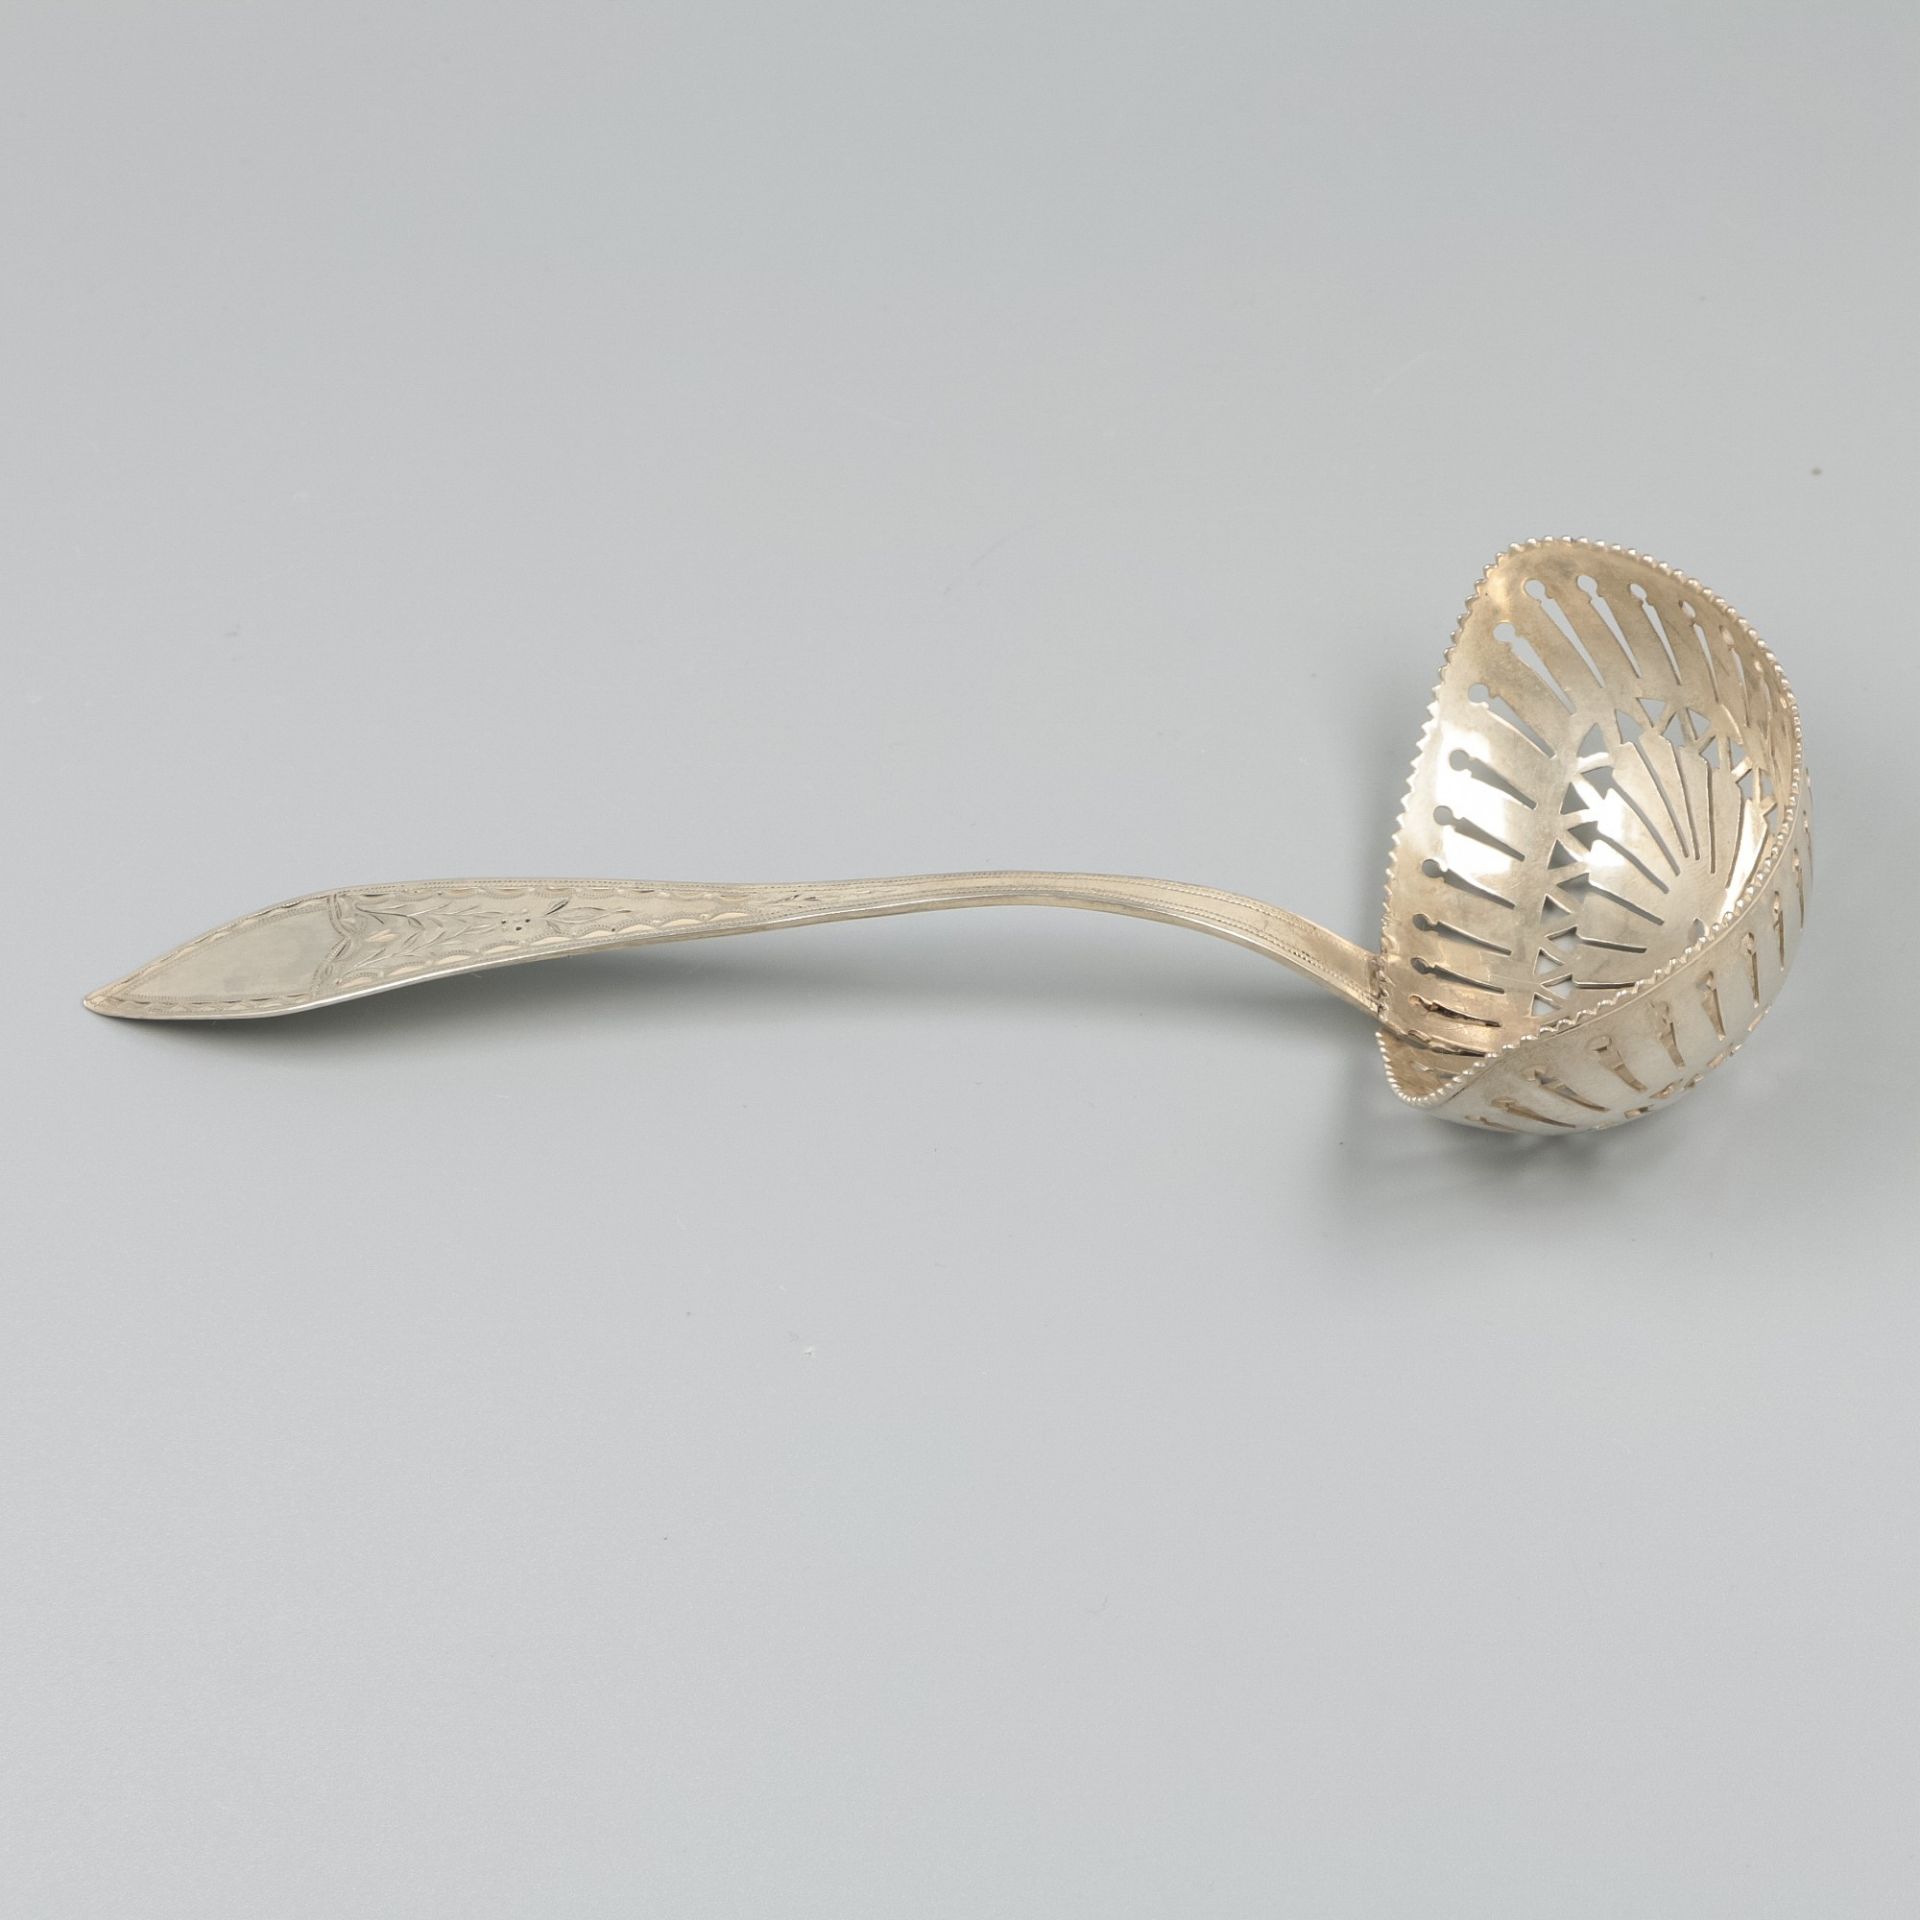 Silver sifter spoon, Johannes Anthony Timmermans, Amsterdam 1807-09. - Image 3 of 6